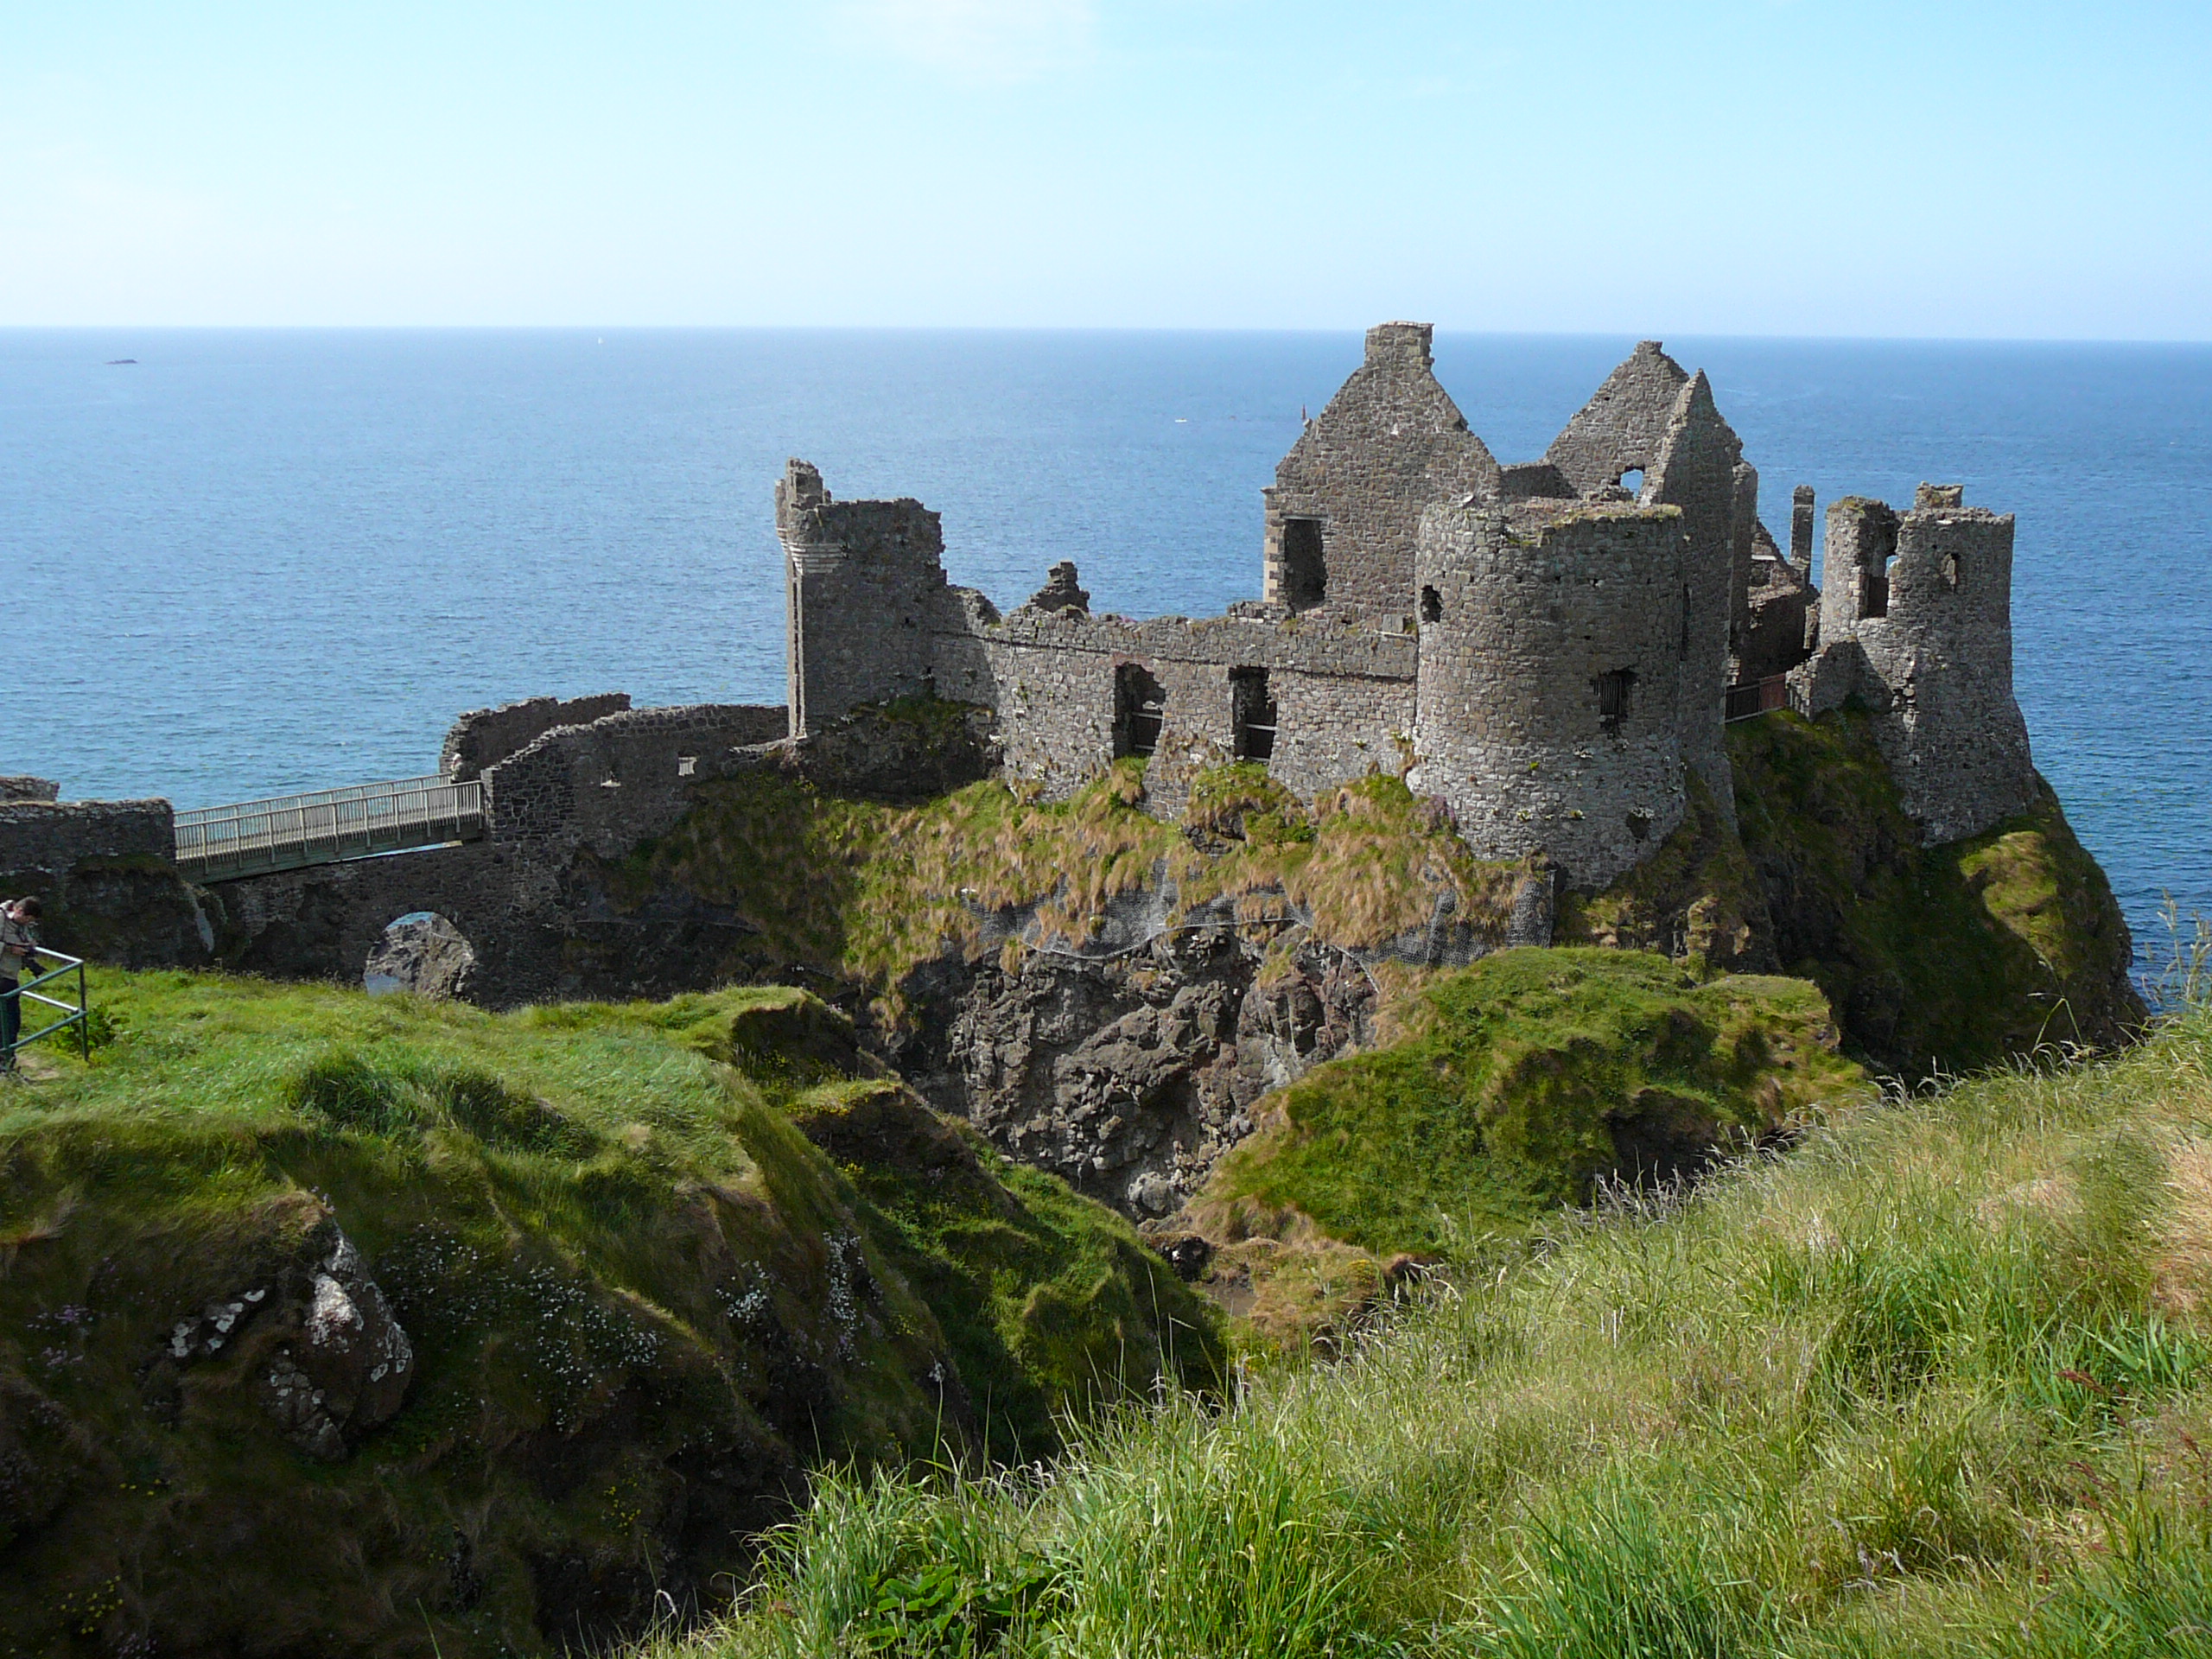 Dunluce Castle ruins on a cliff overlooking the ocean.